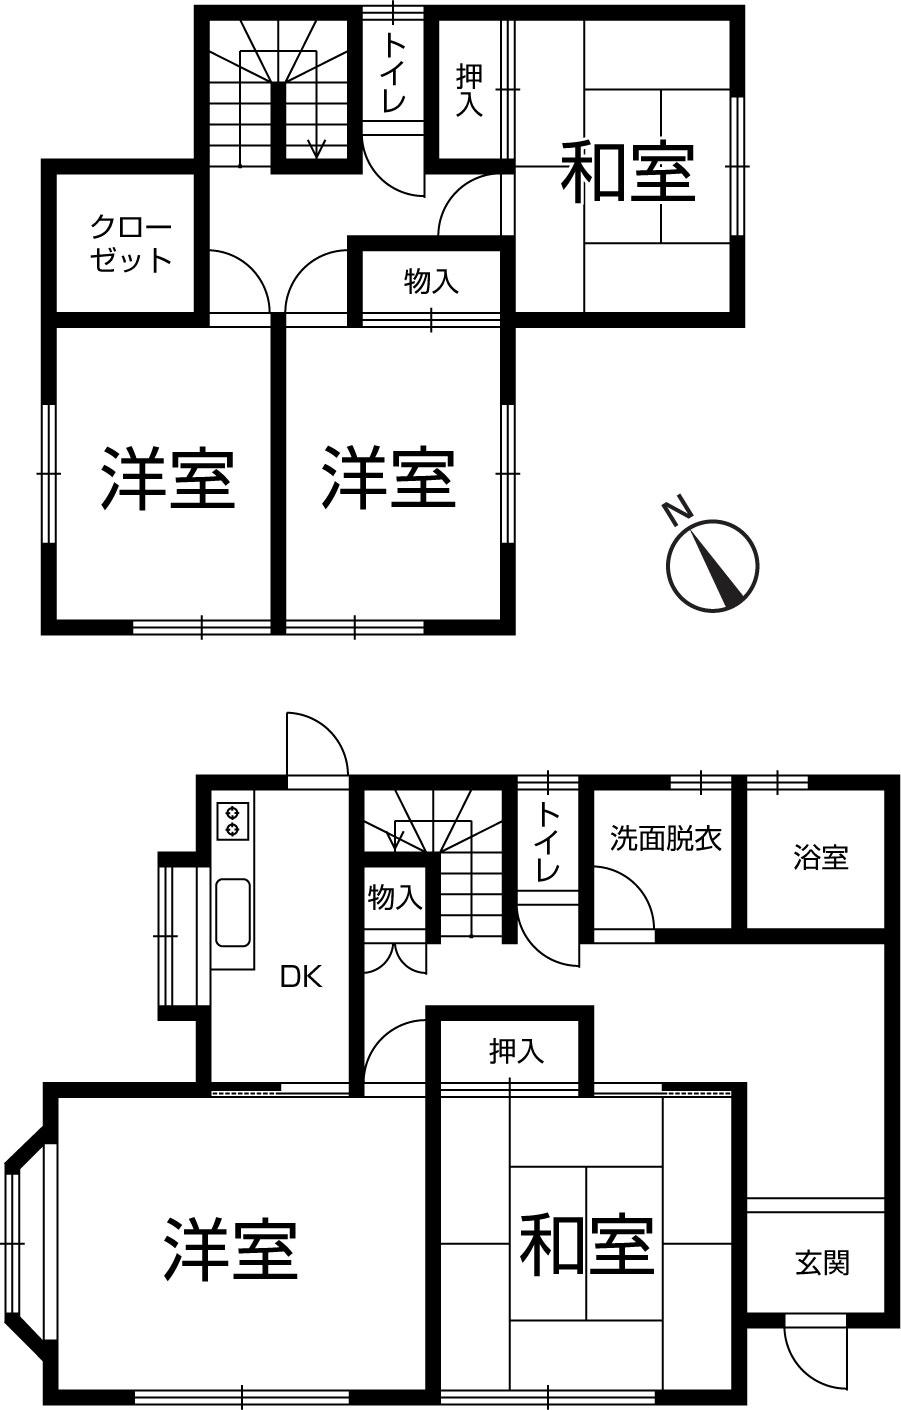 Floor plan. 15.8 million yen, 4LDK, Land area 165.27 sq m , 3 rooms in the building area 109.3 sq m 2 floor, 4LDK. It does not become a fight can have a lot of children